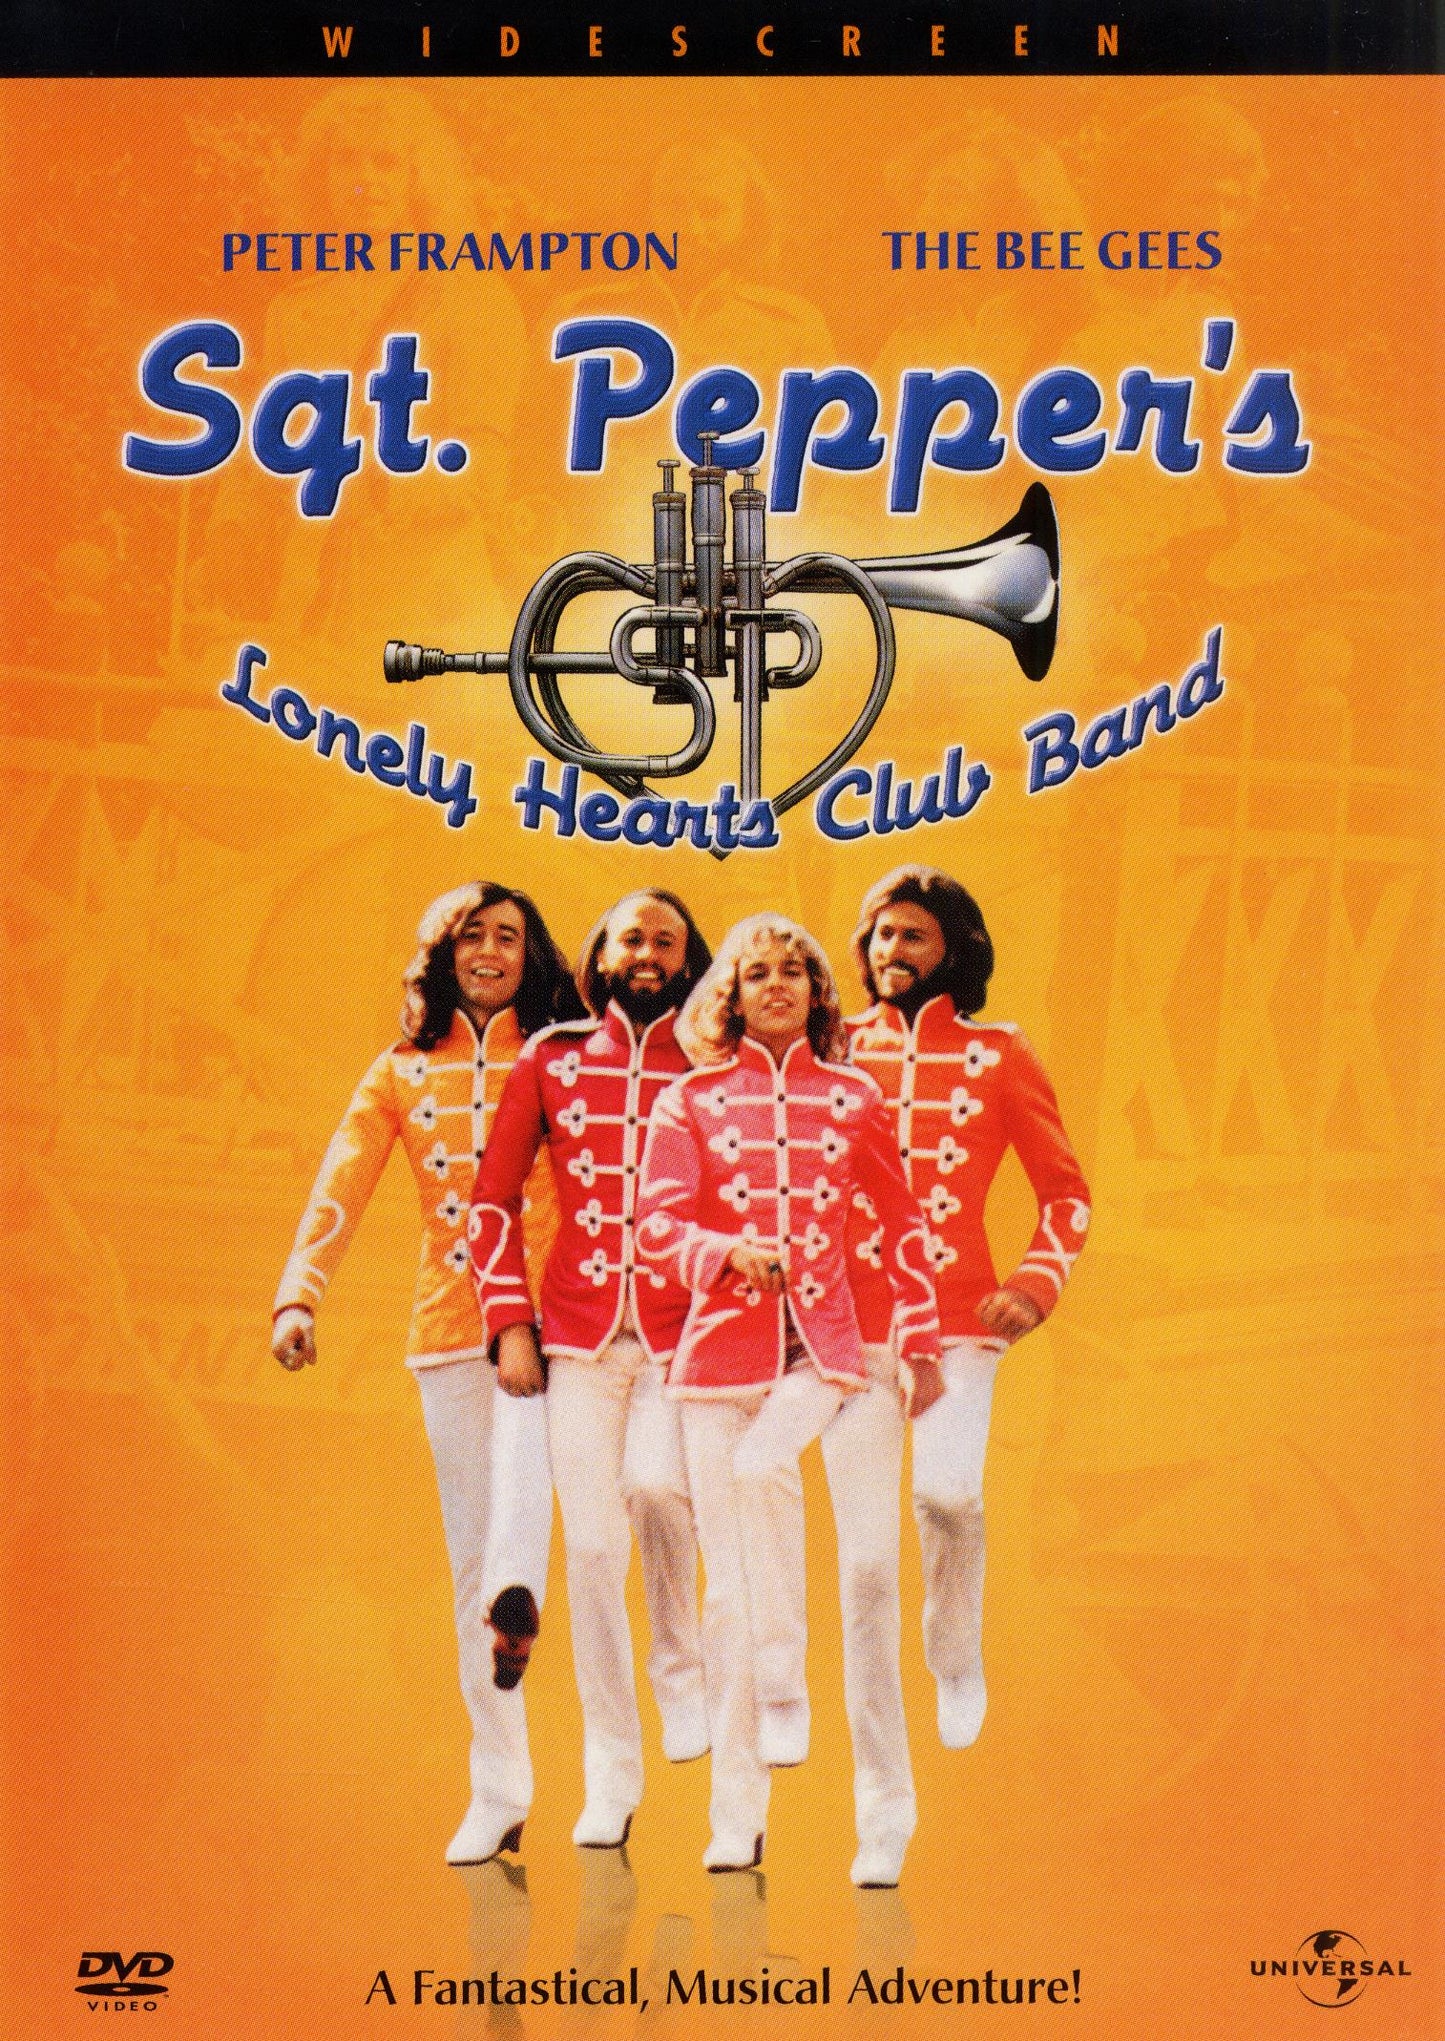 Sgt. Pepper's Lonely Hearts Club Band cover art